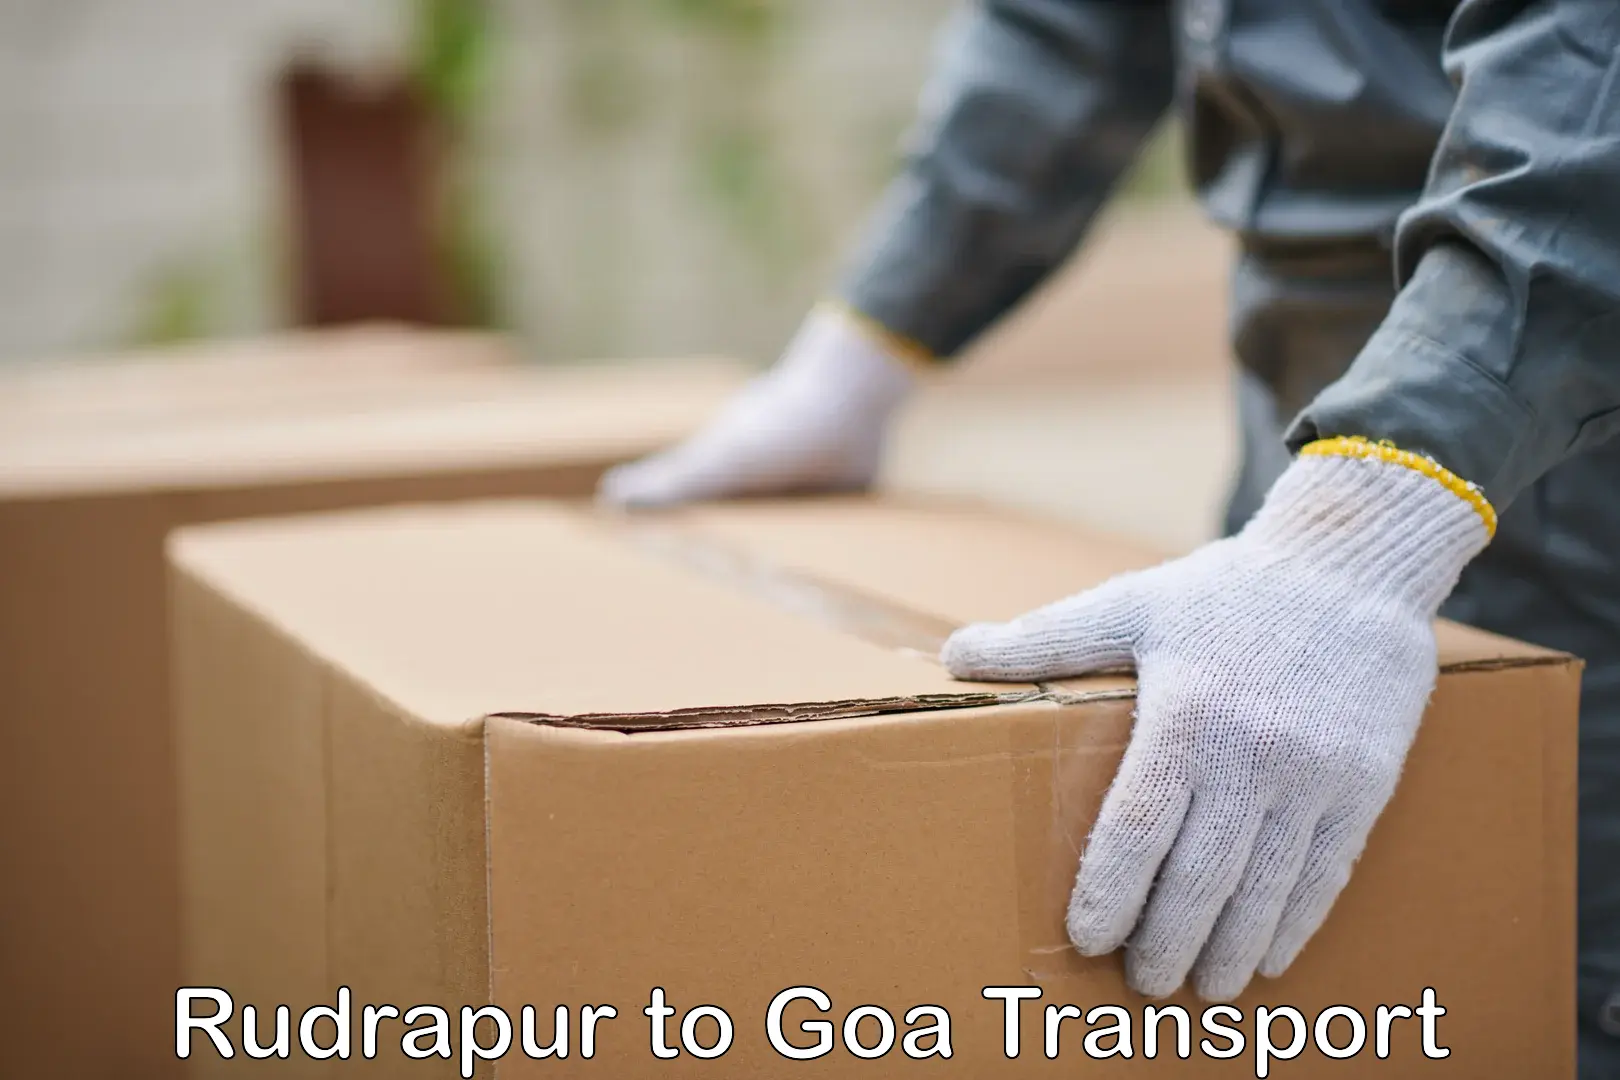 Cycle transportation service Rudrapur to IIT Goa